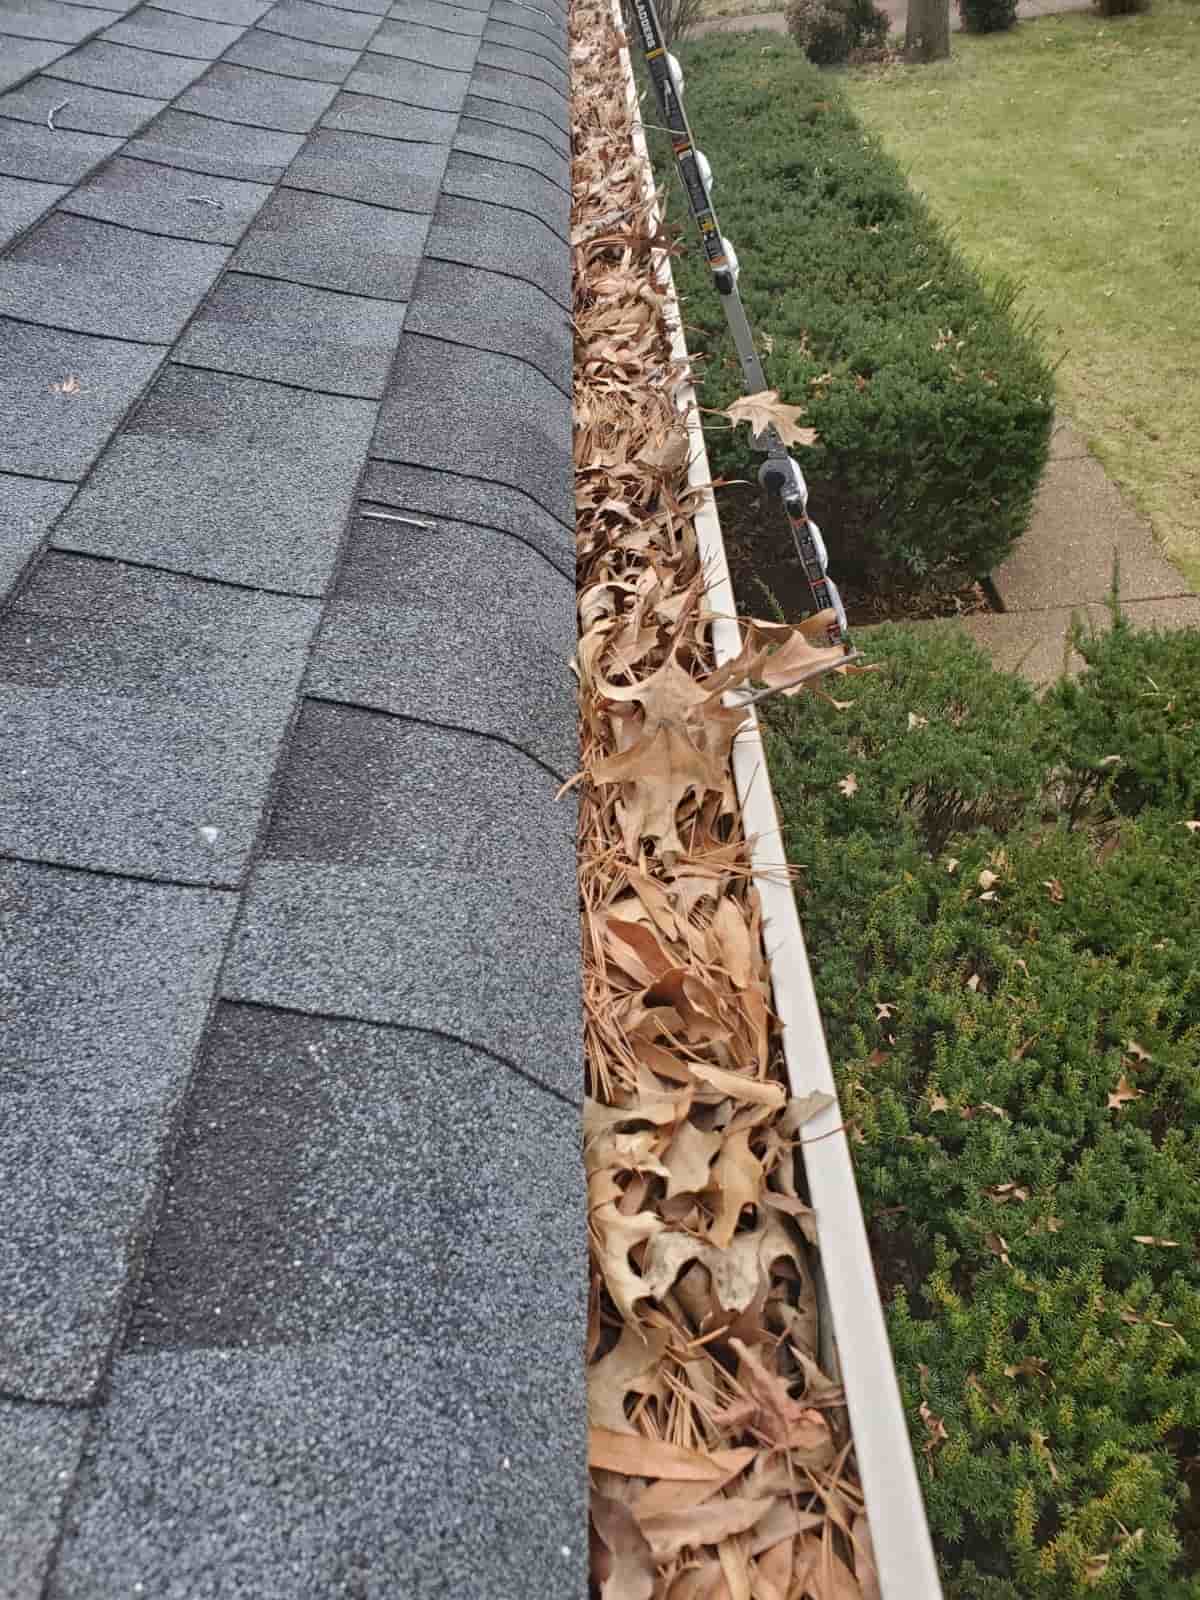 downspout to hose